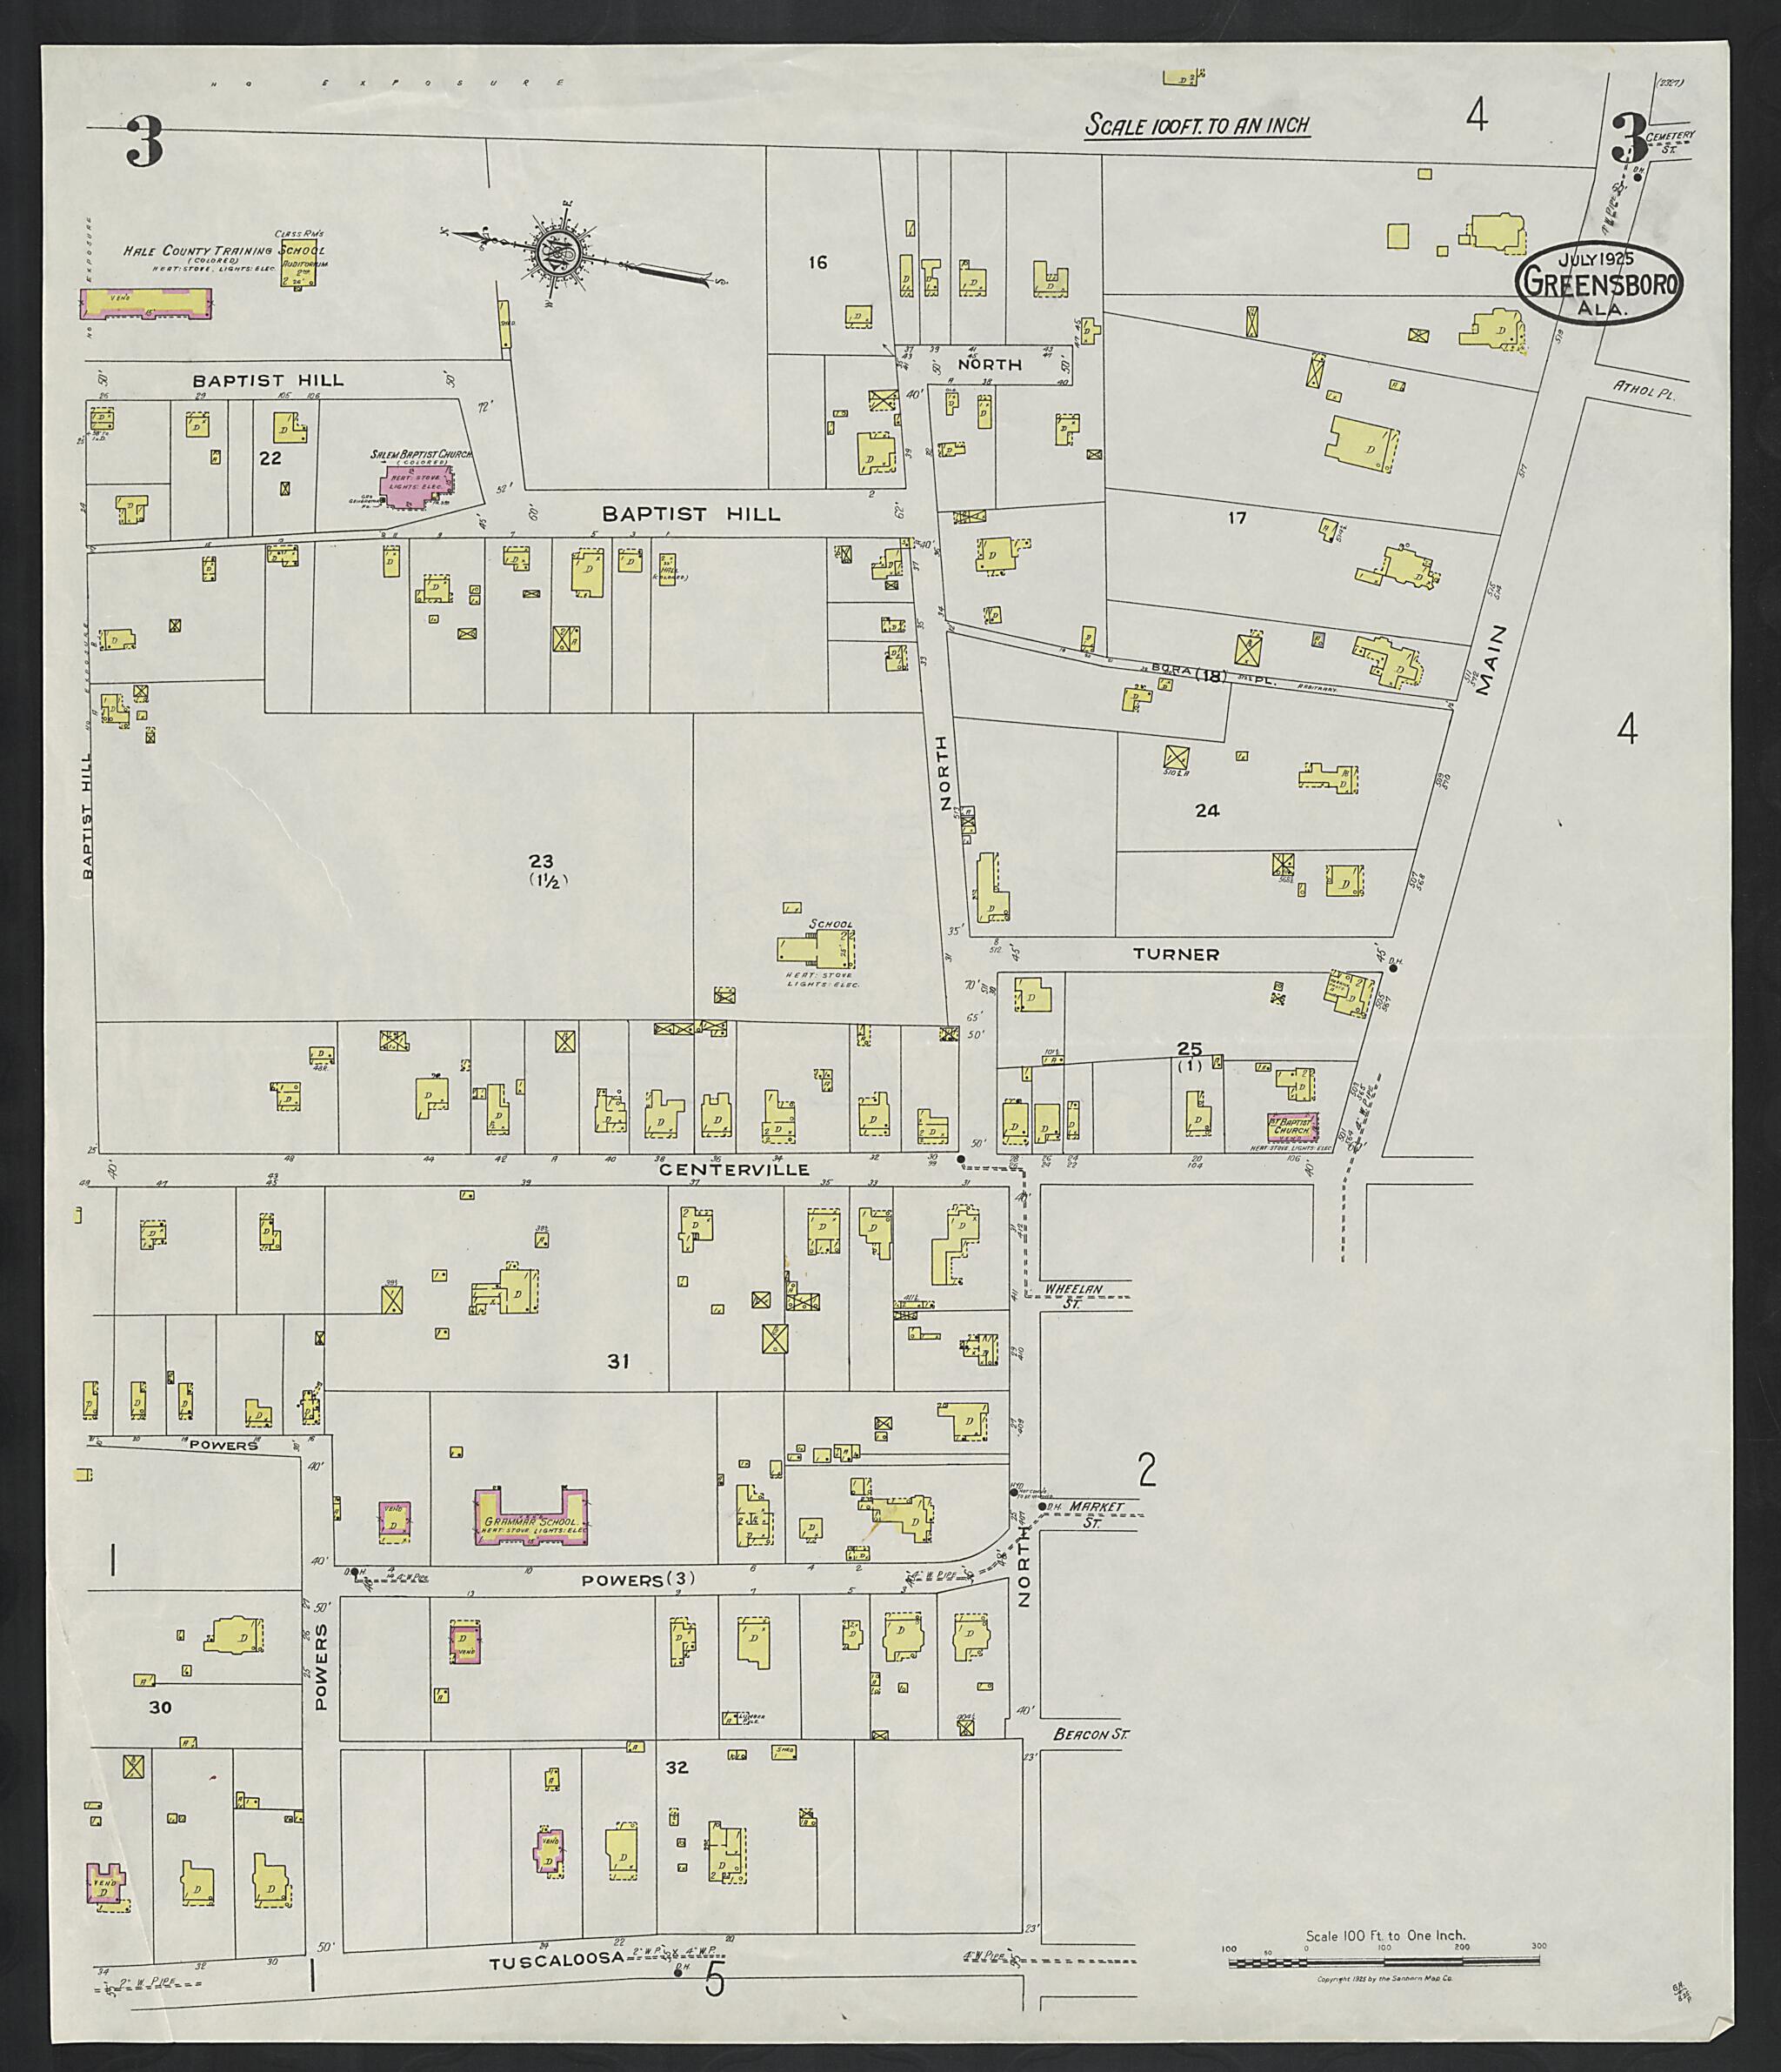 This old map of Greensboro, Hale County, Alabama was created by Sanborn Map Company in 1925